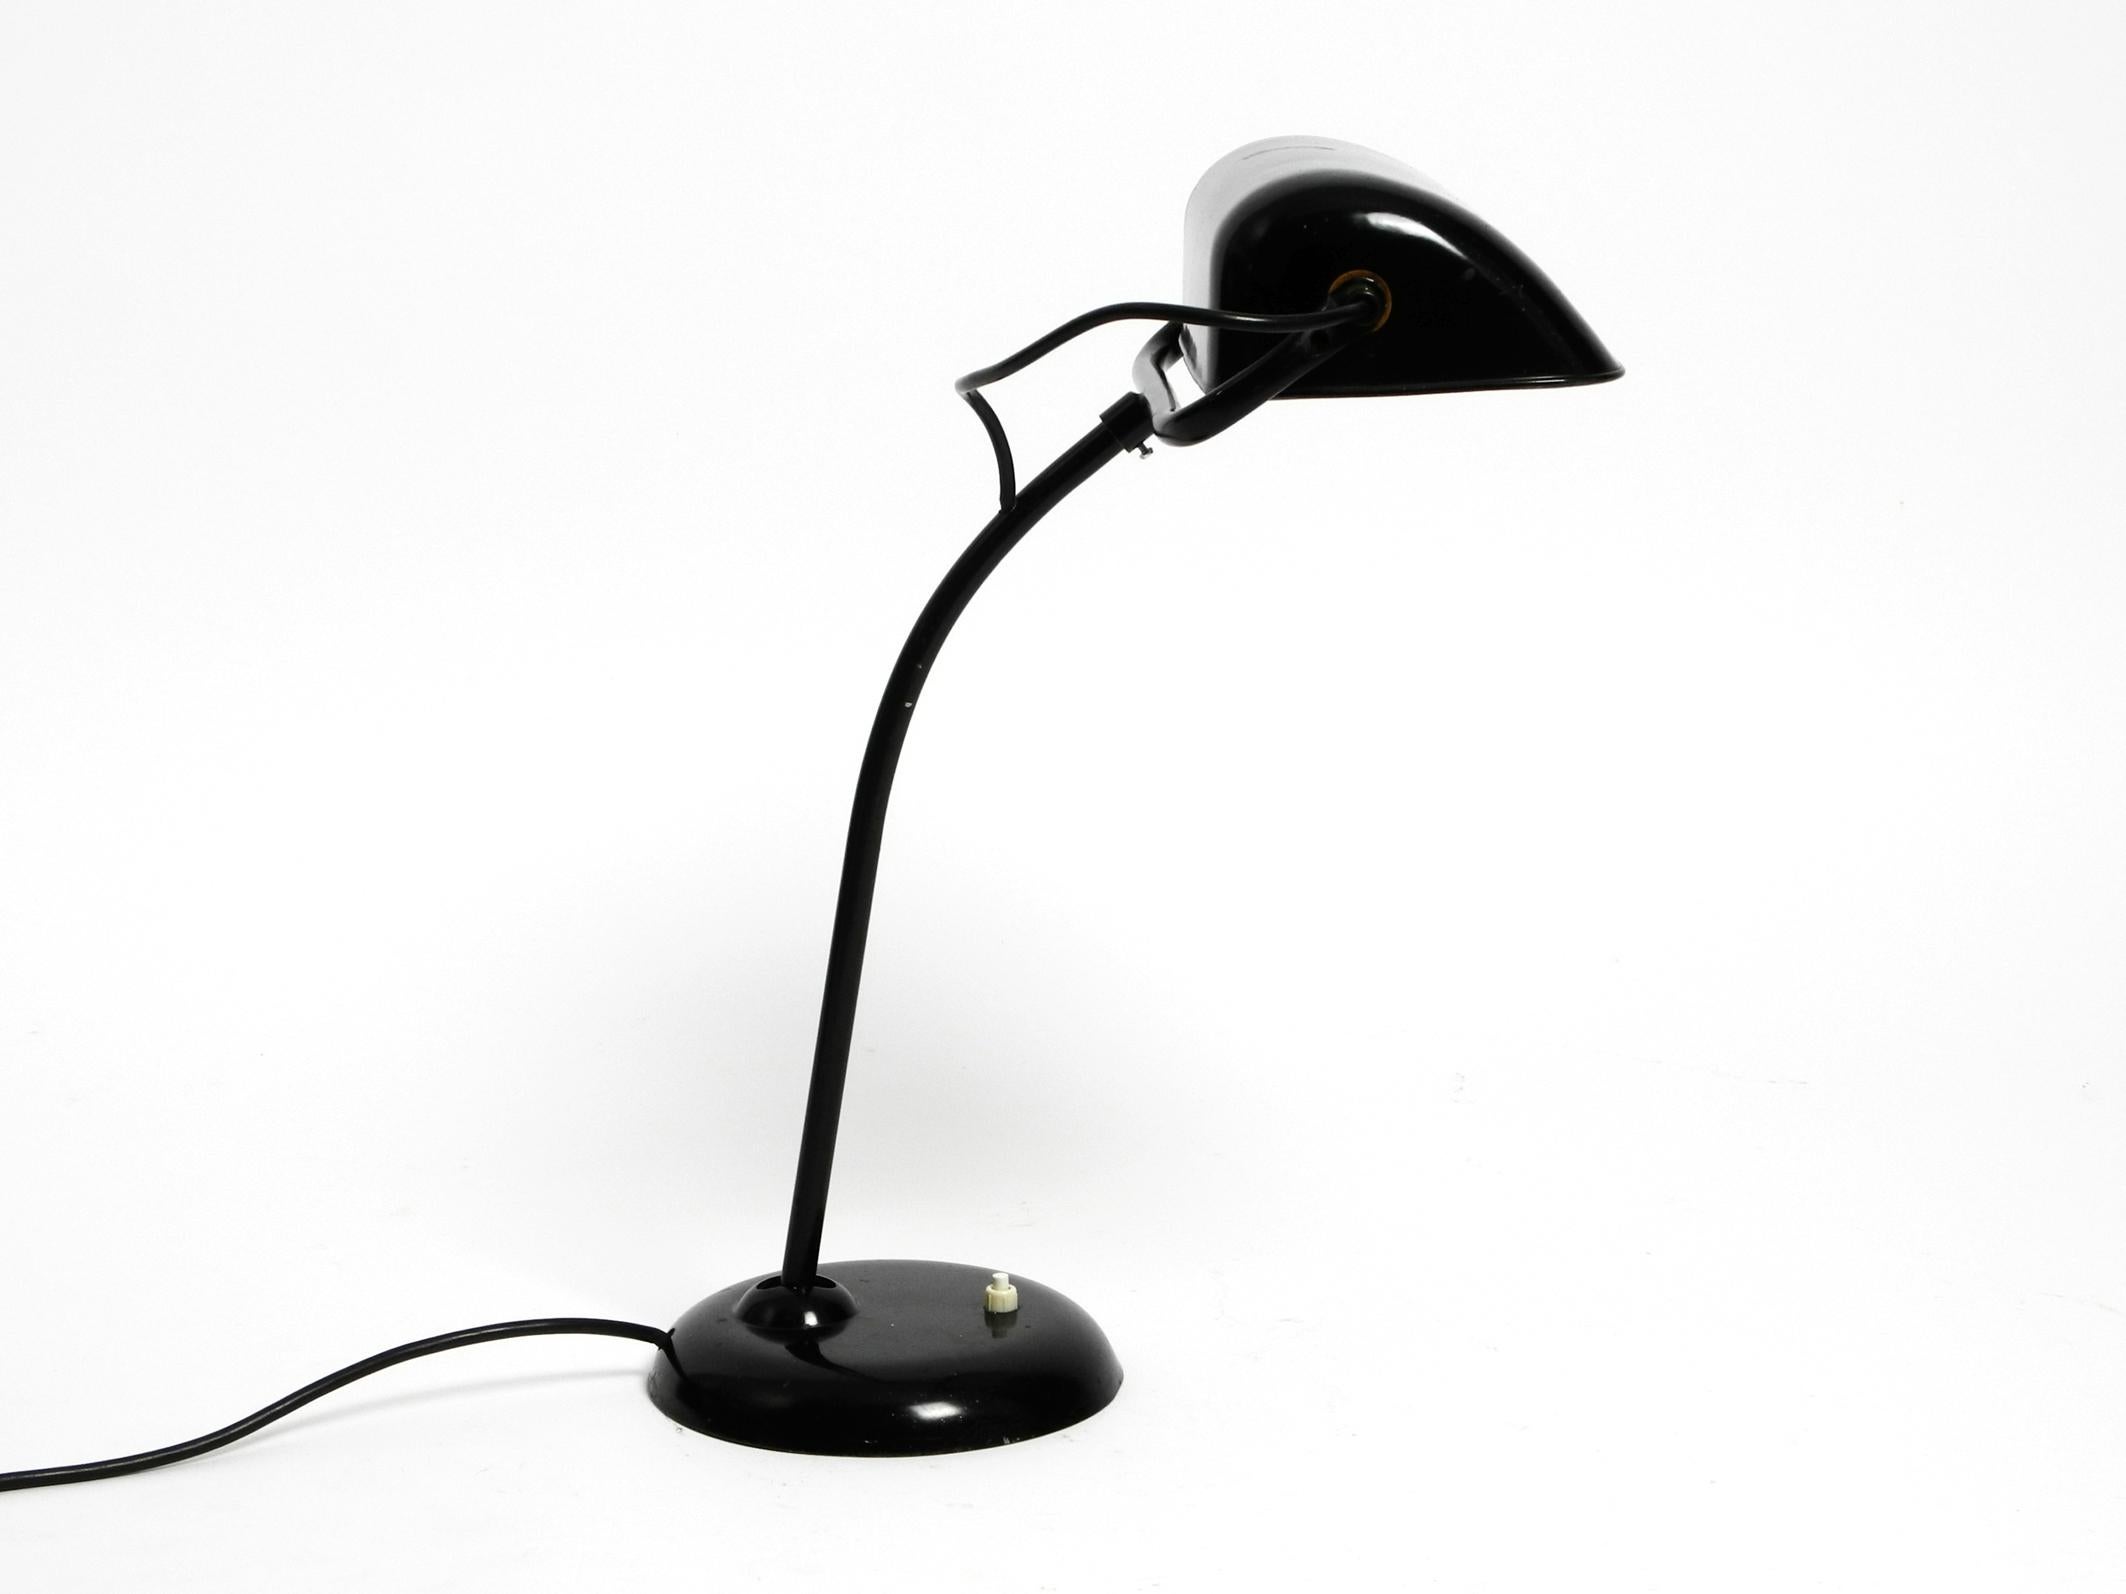 Very rare original 1940s Kaiser Idell industrial metal table lamp model 6581 in black.
100% original condition and fully functional. With original paint.
The rare model with the wide lampshade.
Great industrial design in very good vintage condition